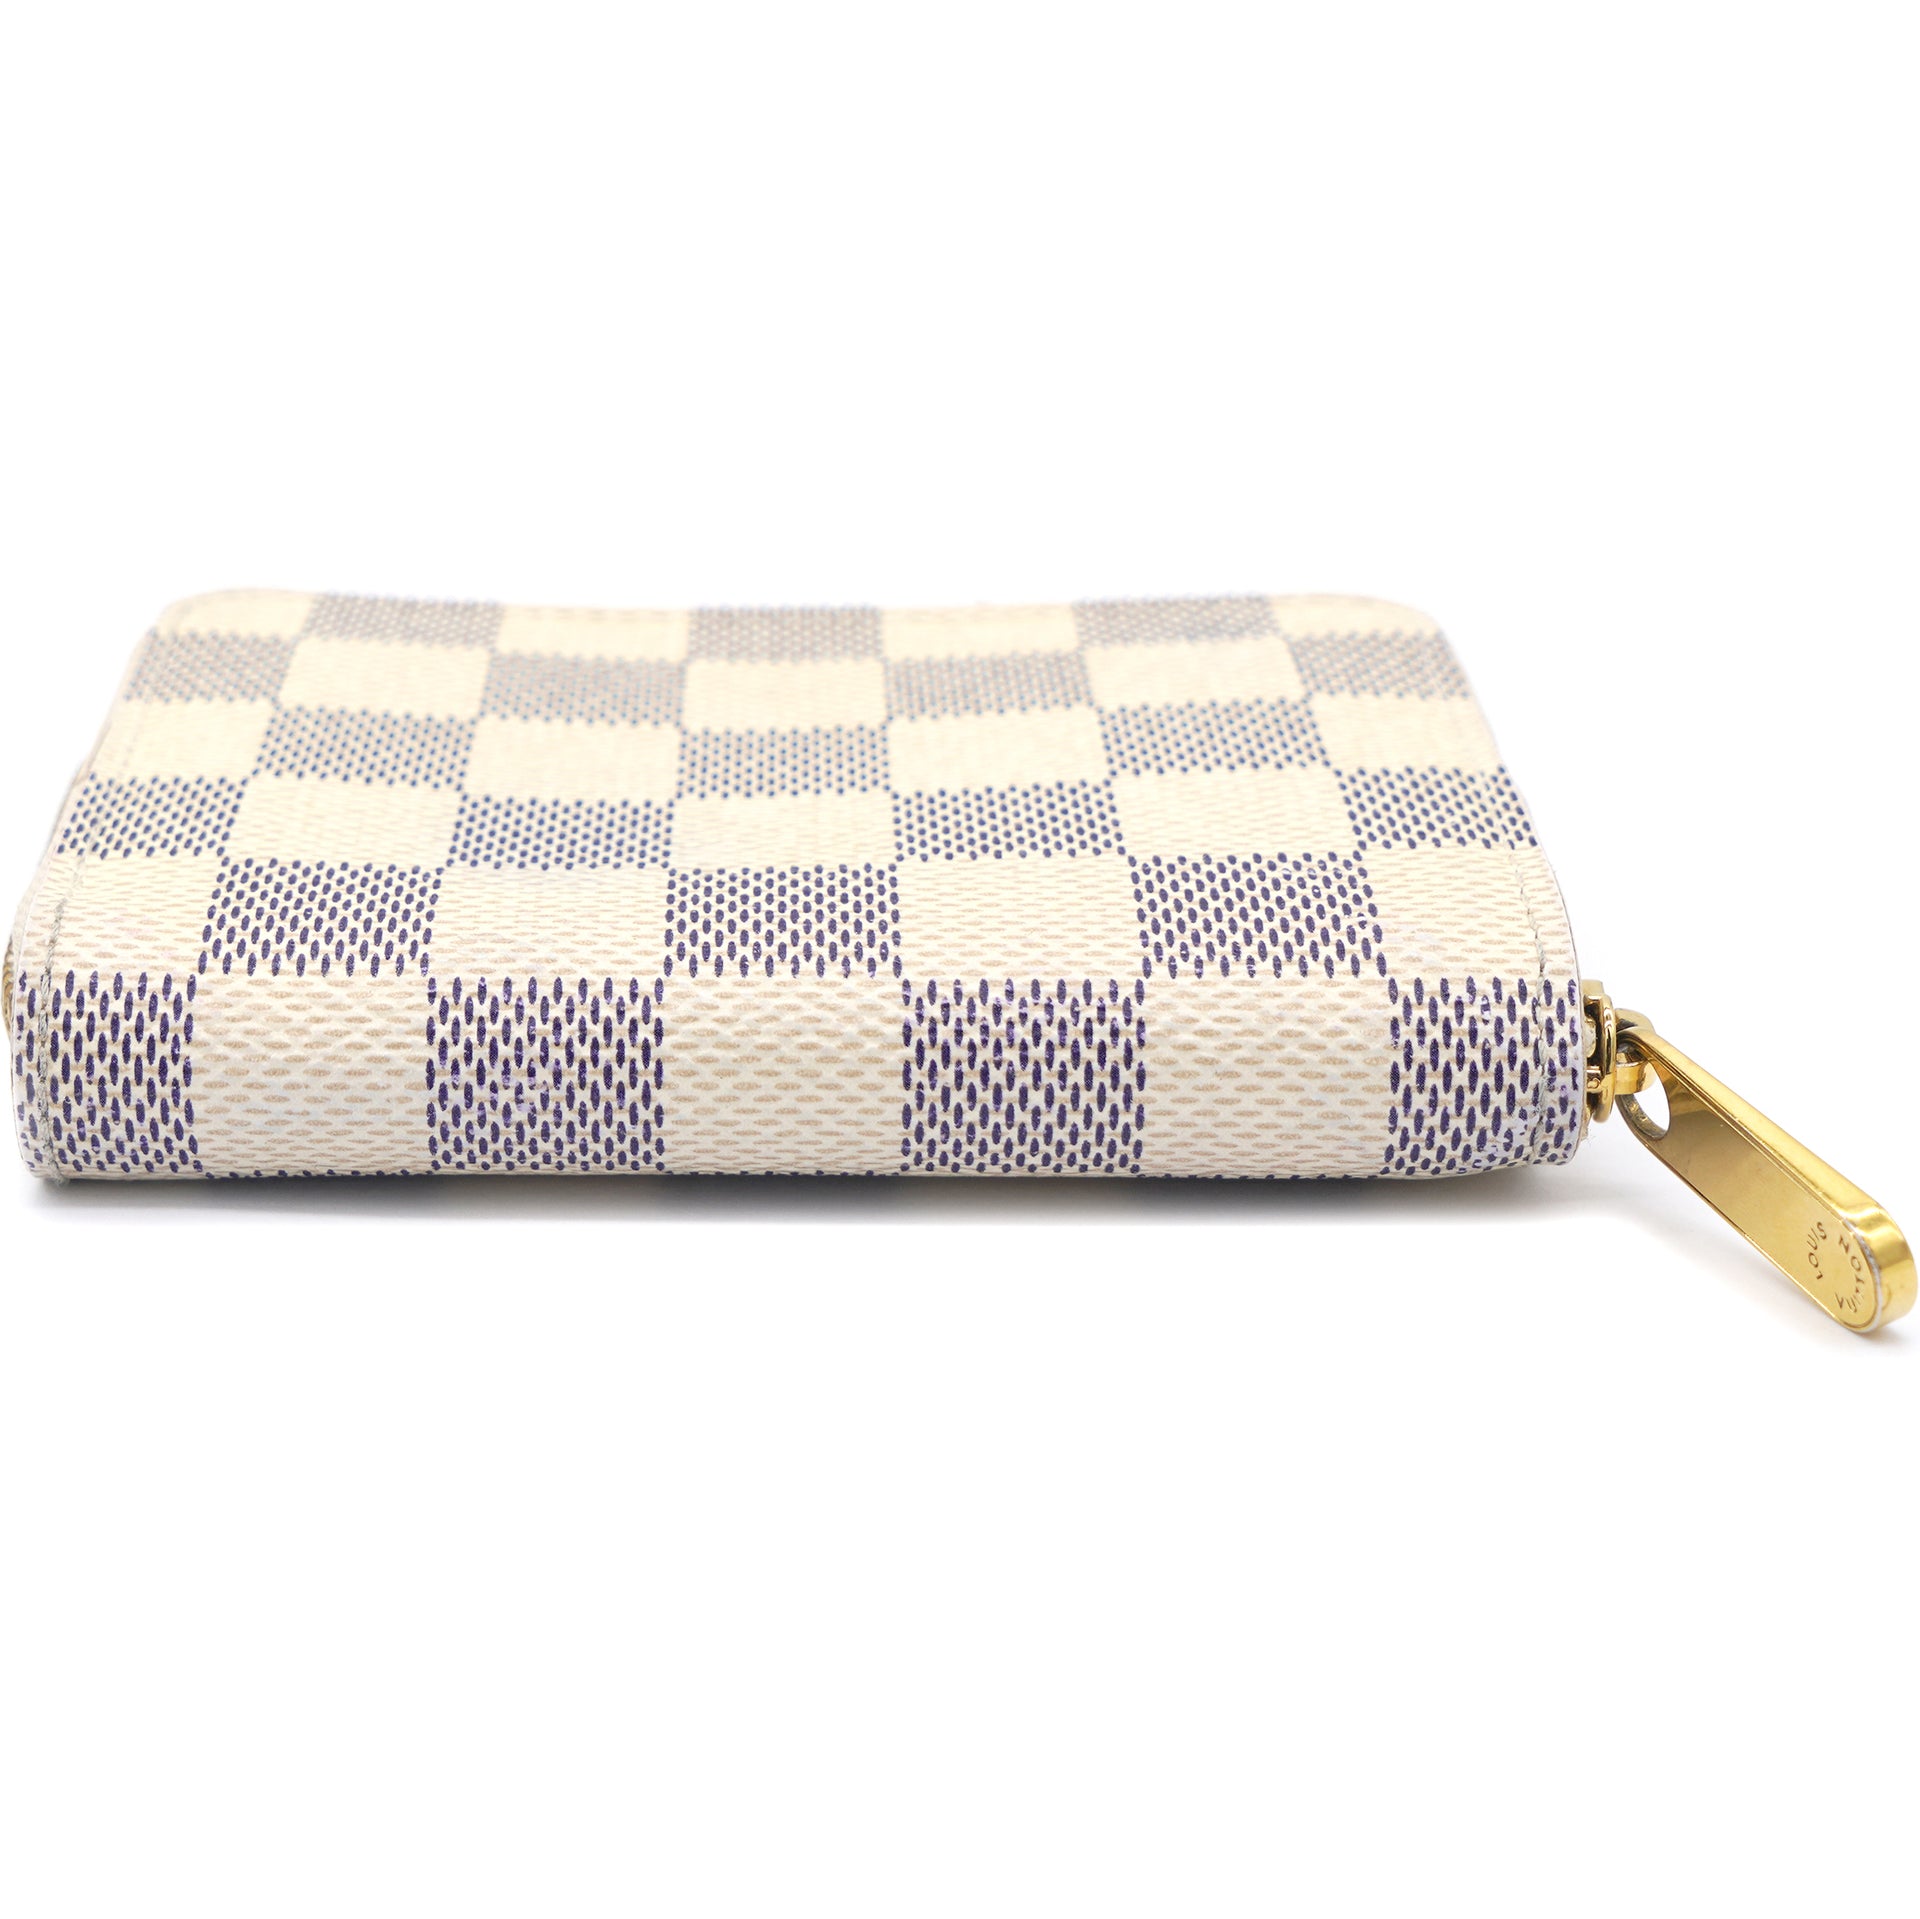 Zippy Coin Purse Damier Azur Canvas - Wallets and Small Leather